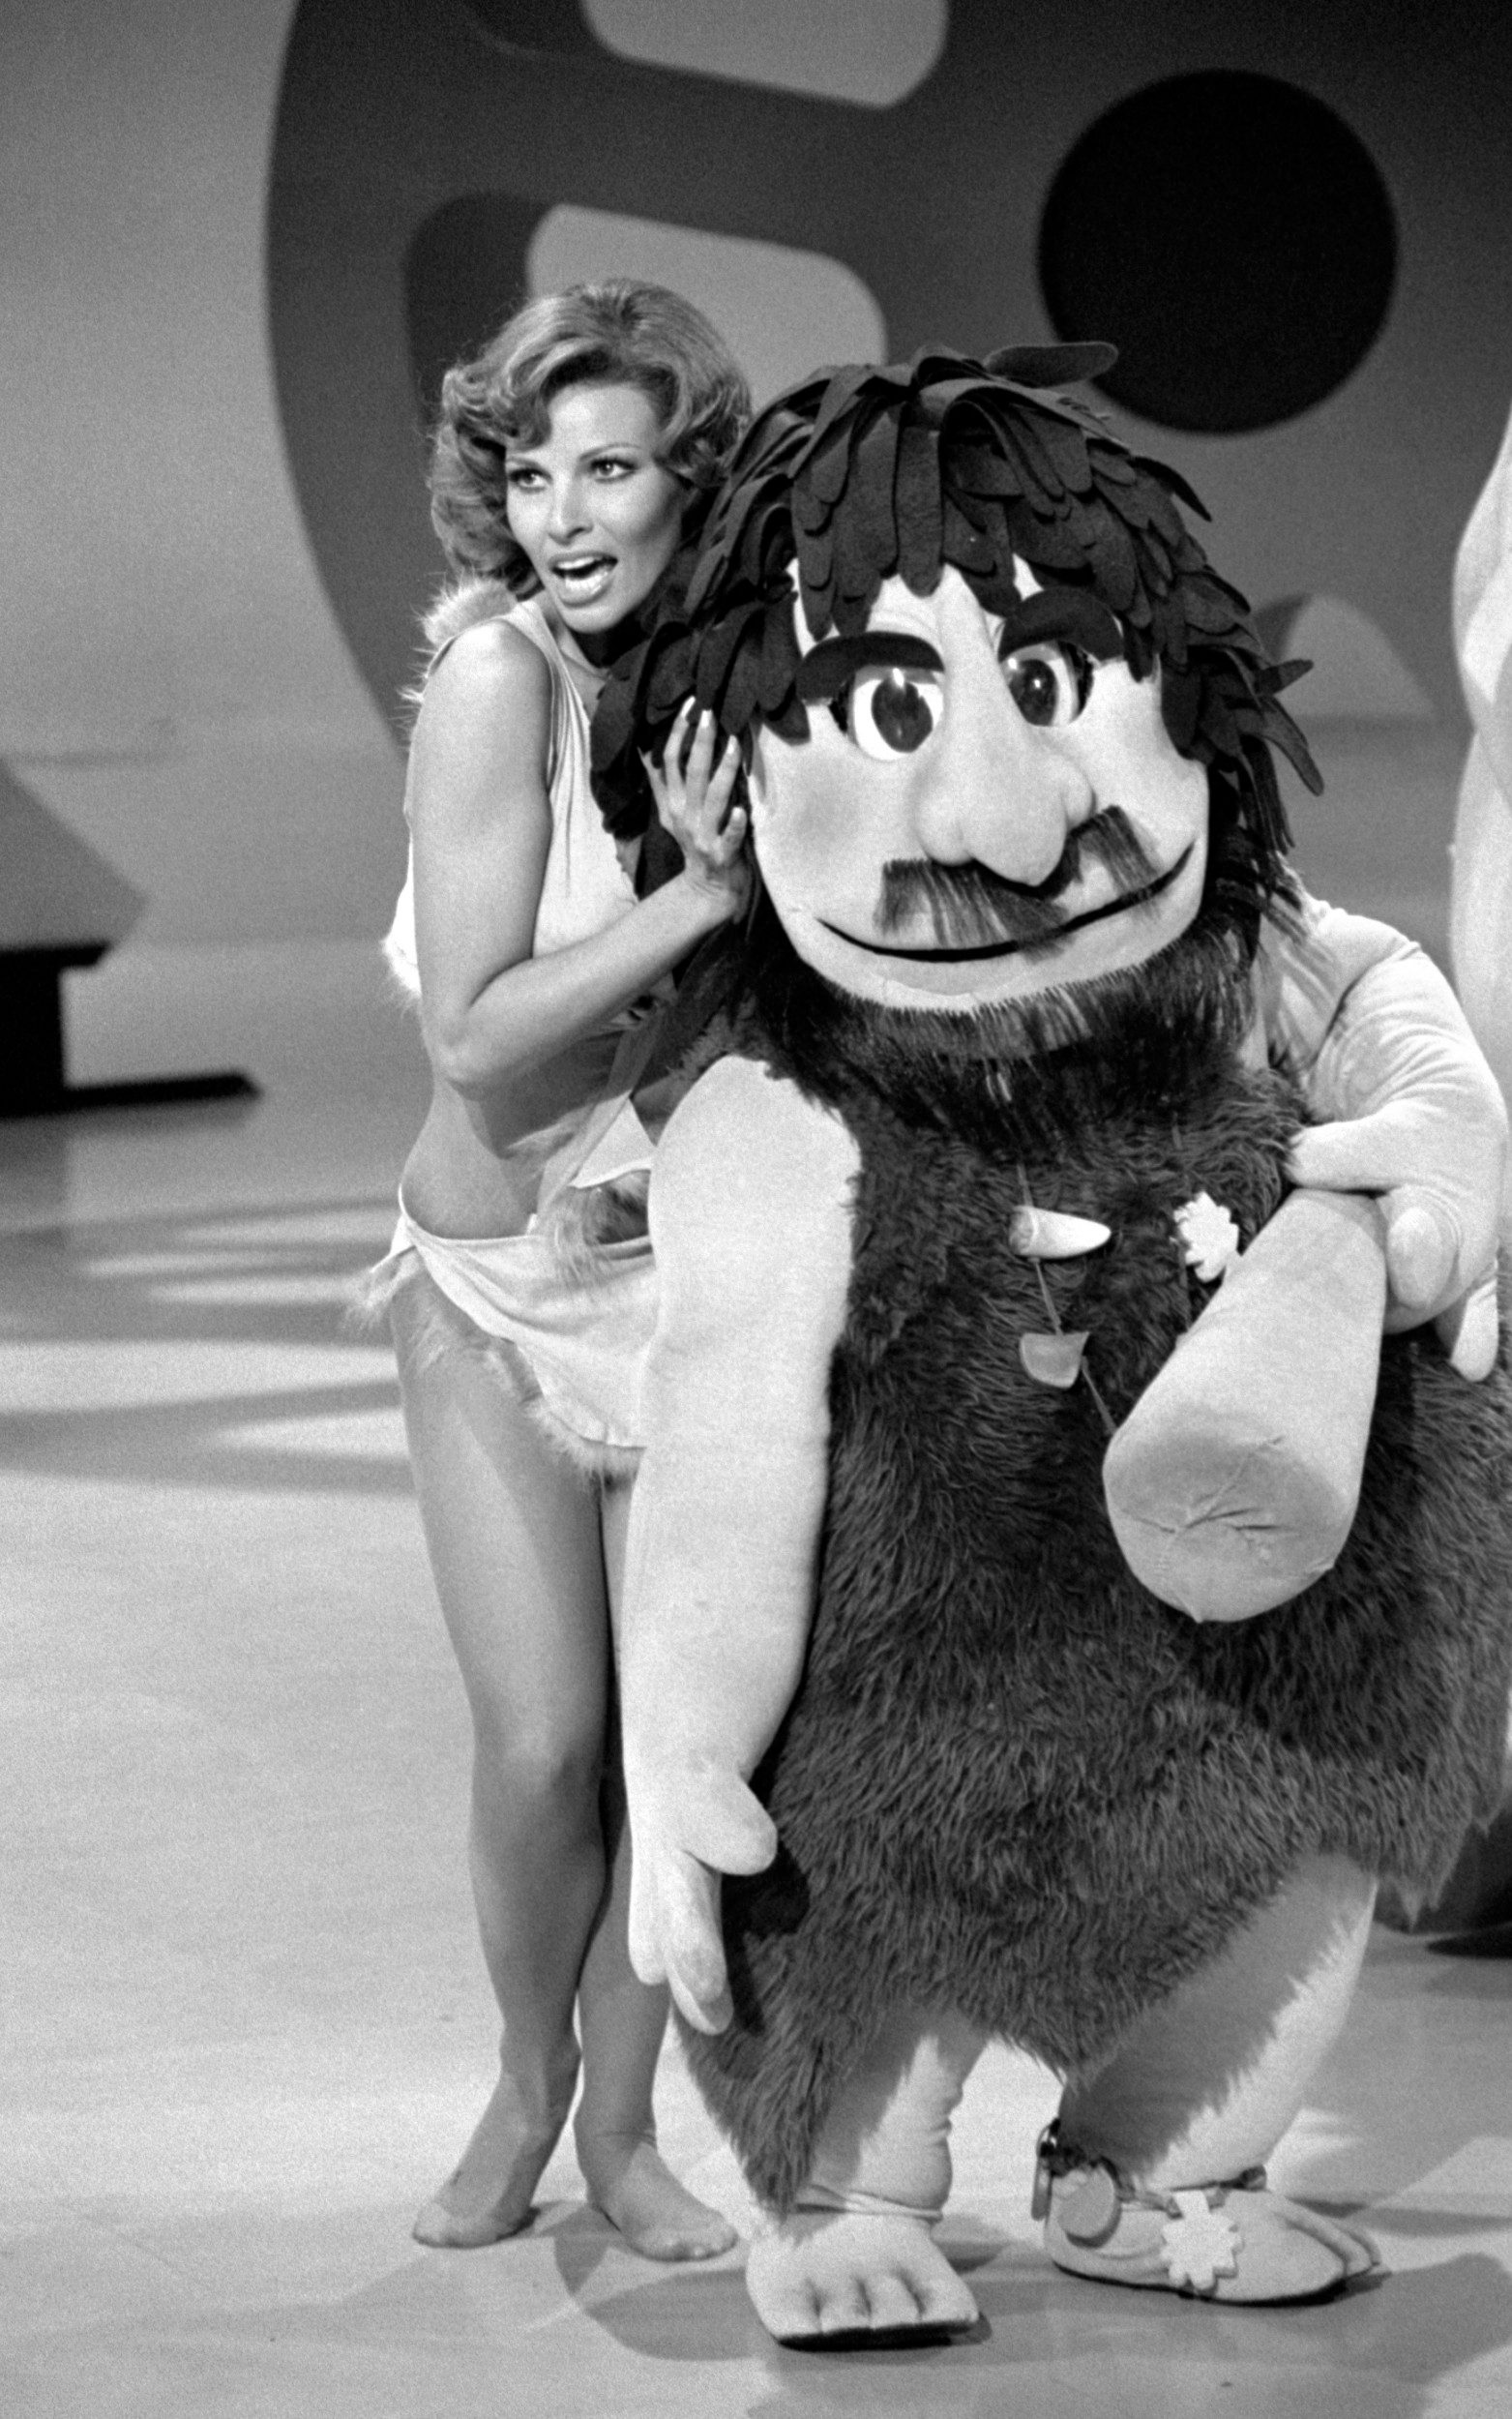 marty krofft, co-creator of the surreal children’s show hr pufnstuf – obituary